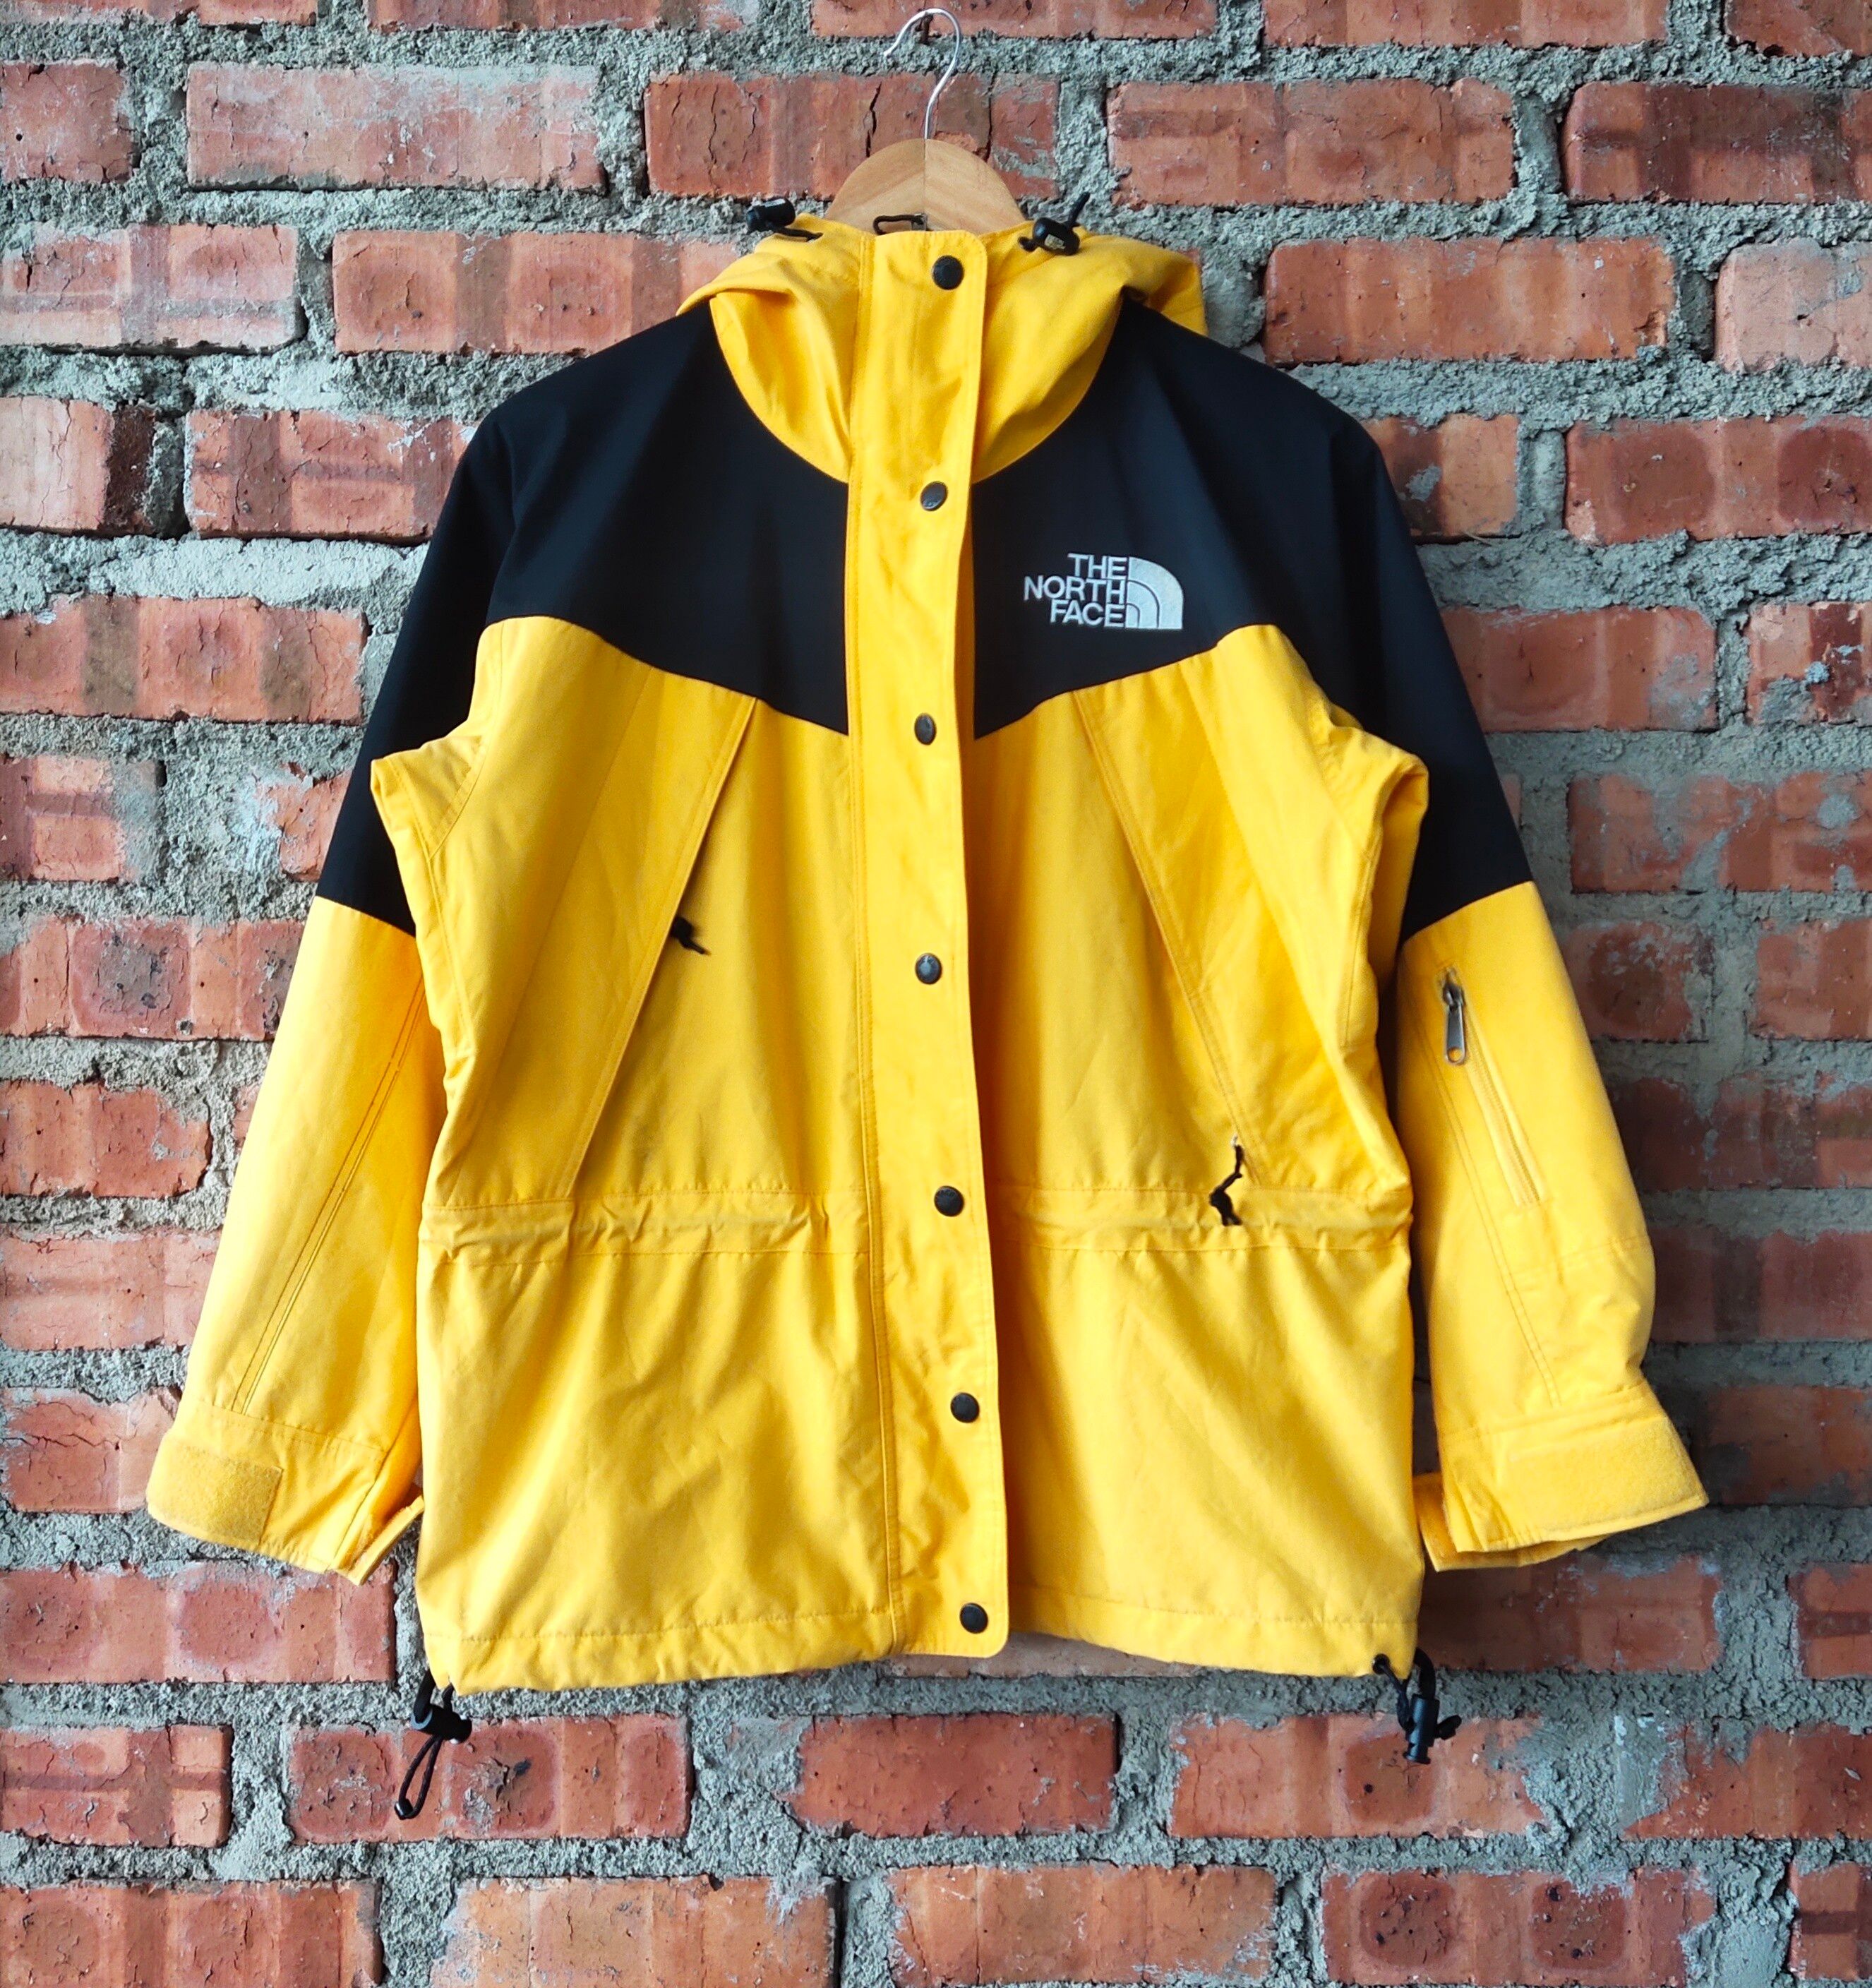 The North Face Vintage North Face Gore-Tex Yellow Jacket Size US M / EU 48-50 / 2 - 1 Preview